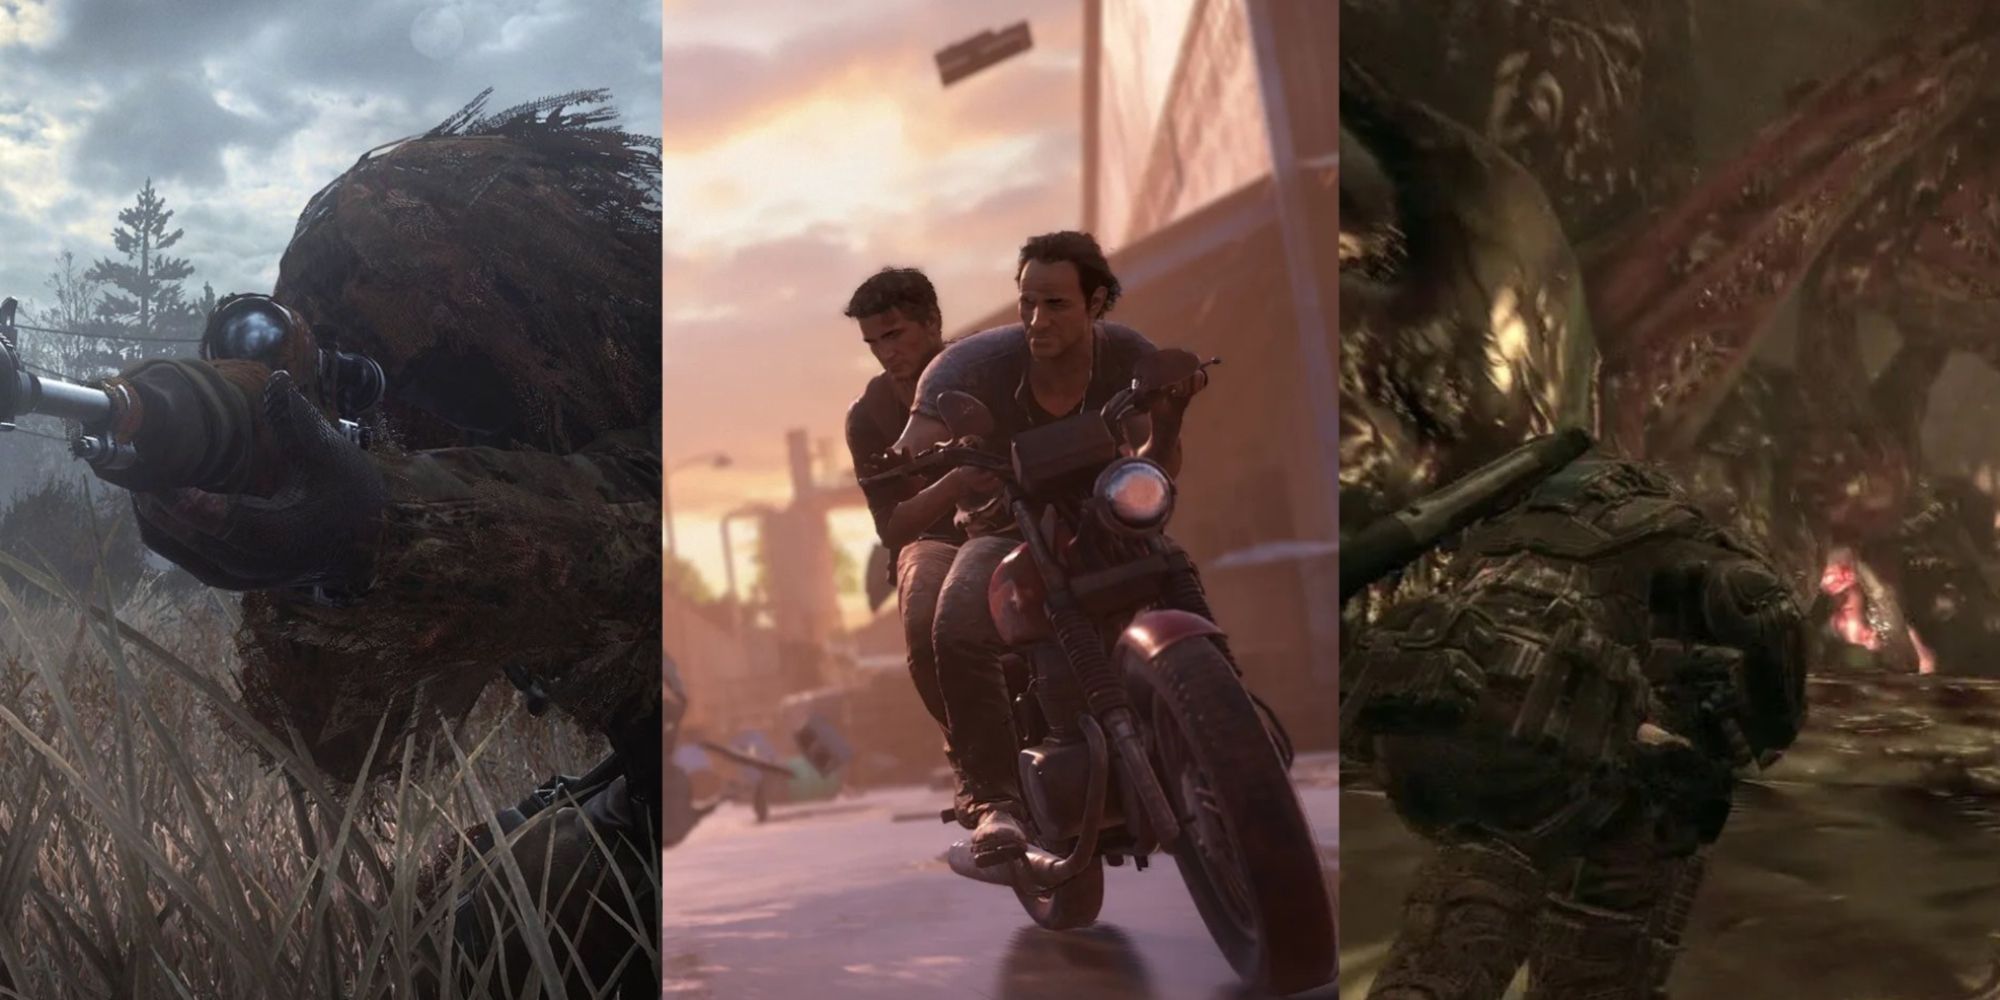 Best Shooter Levels Featured Split Image Call Of Duty 4, Uncharted 4, and Gears Of War 2